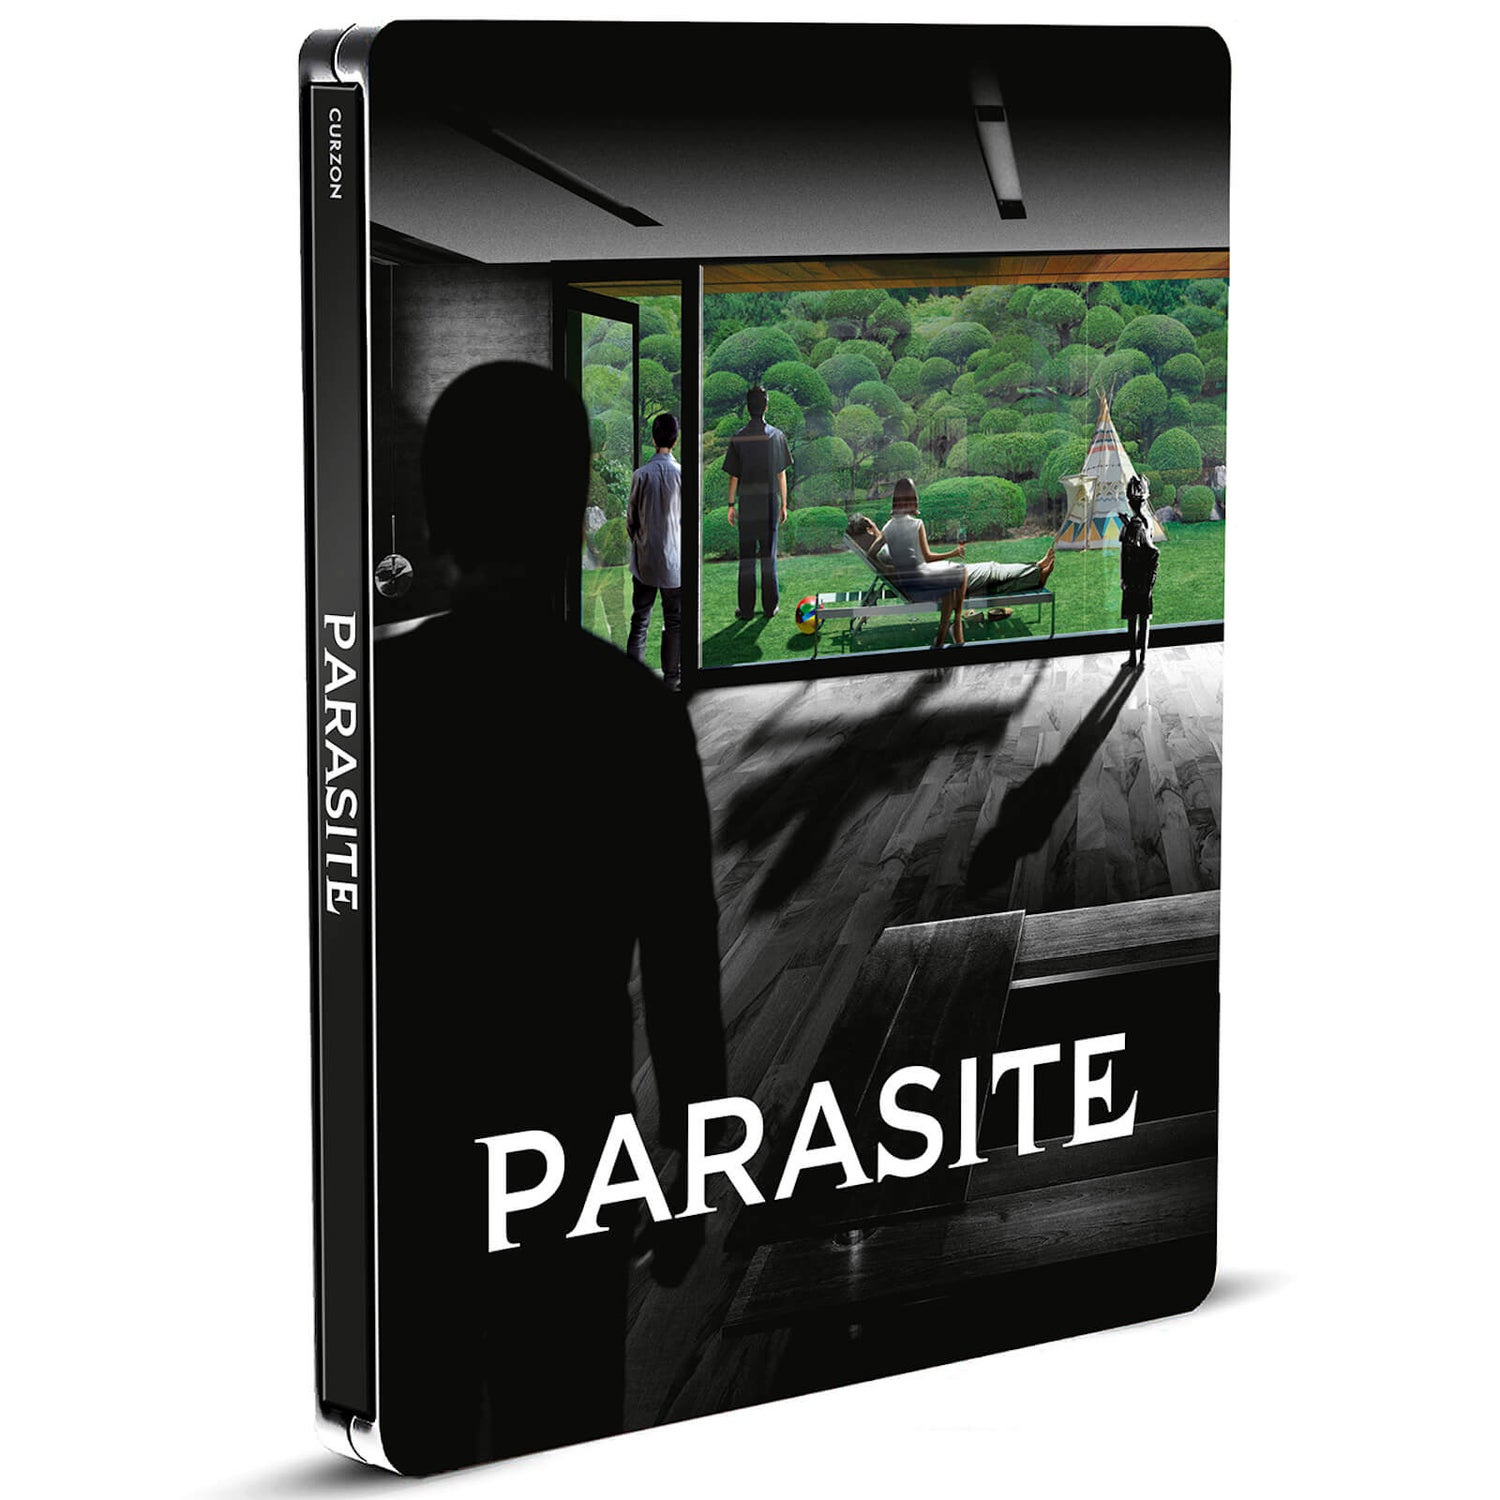 Parasite - Limited Edition 4K Ultra HD Steelbook (Includes 2D Blu-ray)